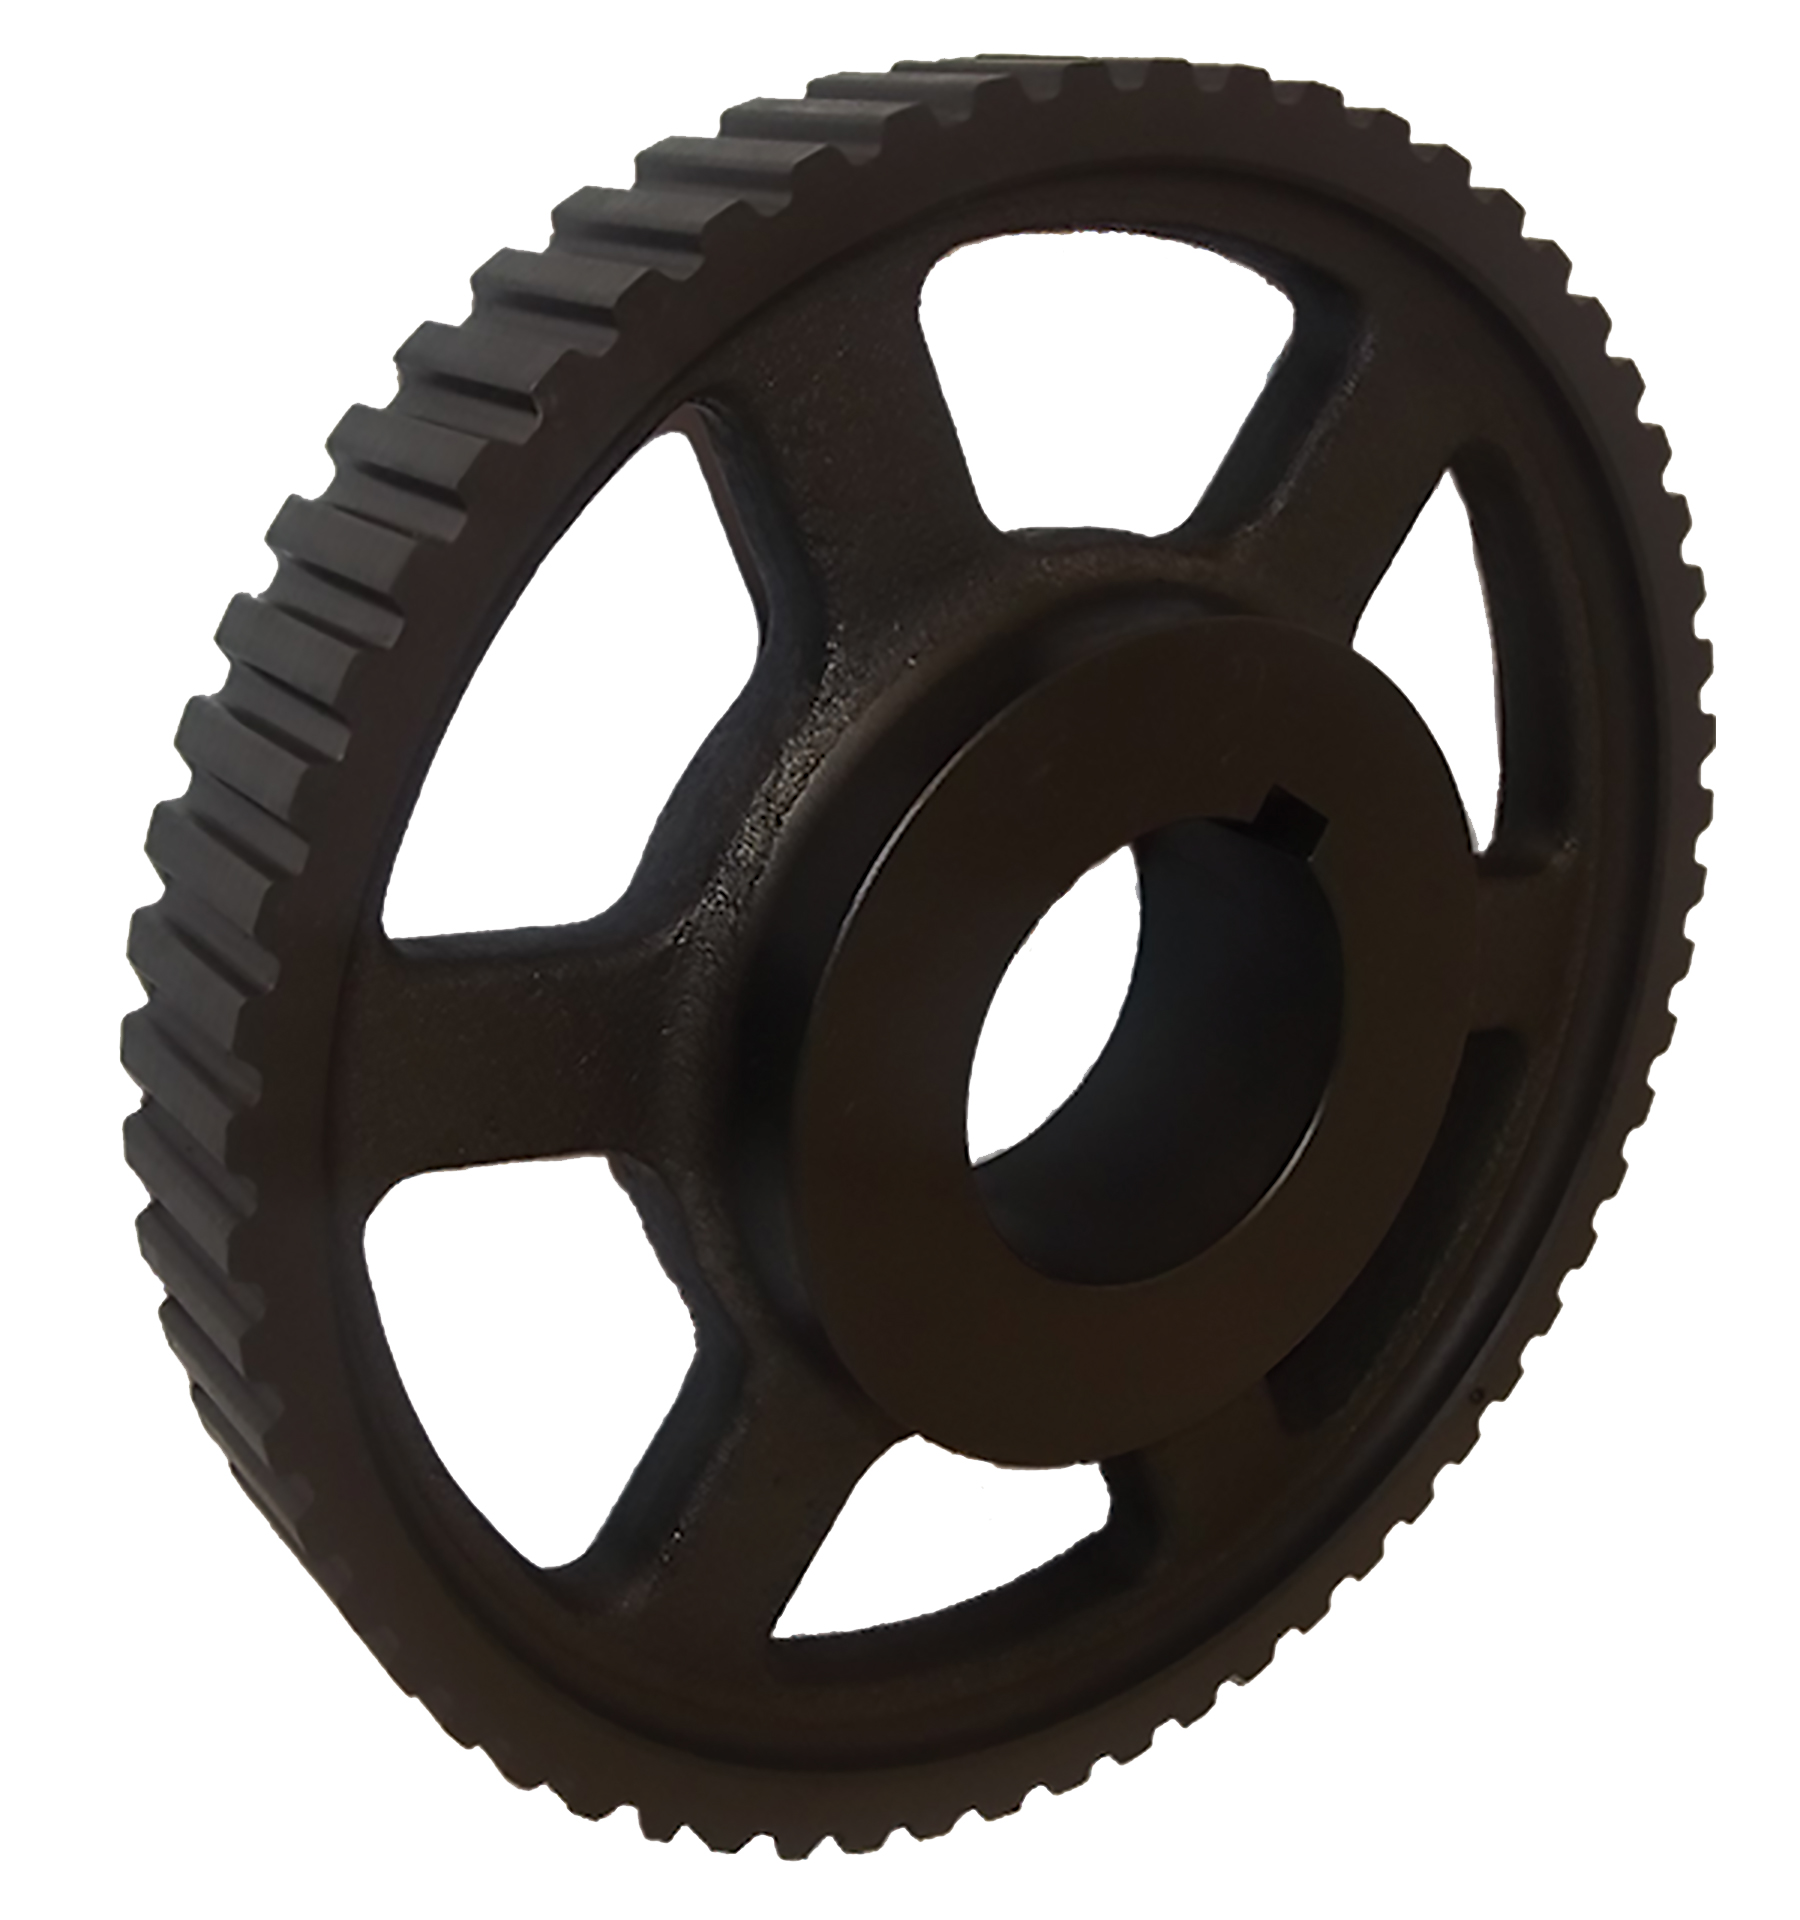 120LP075 - Cast Iron Imperial Pitch Pulleys